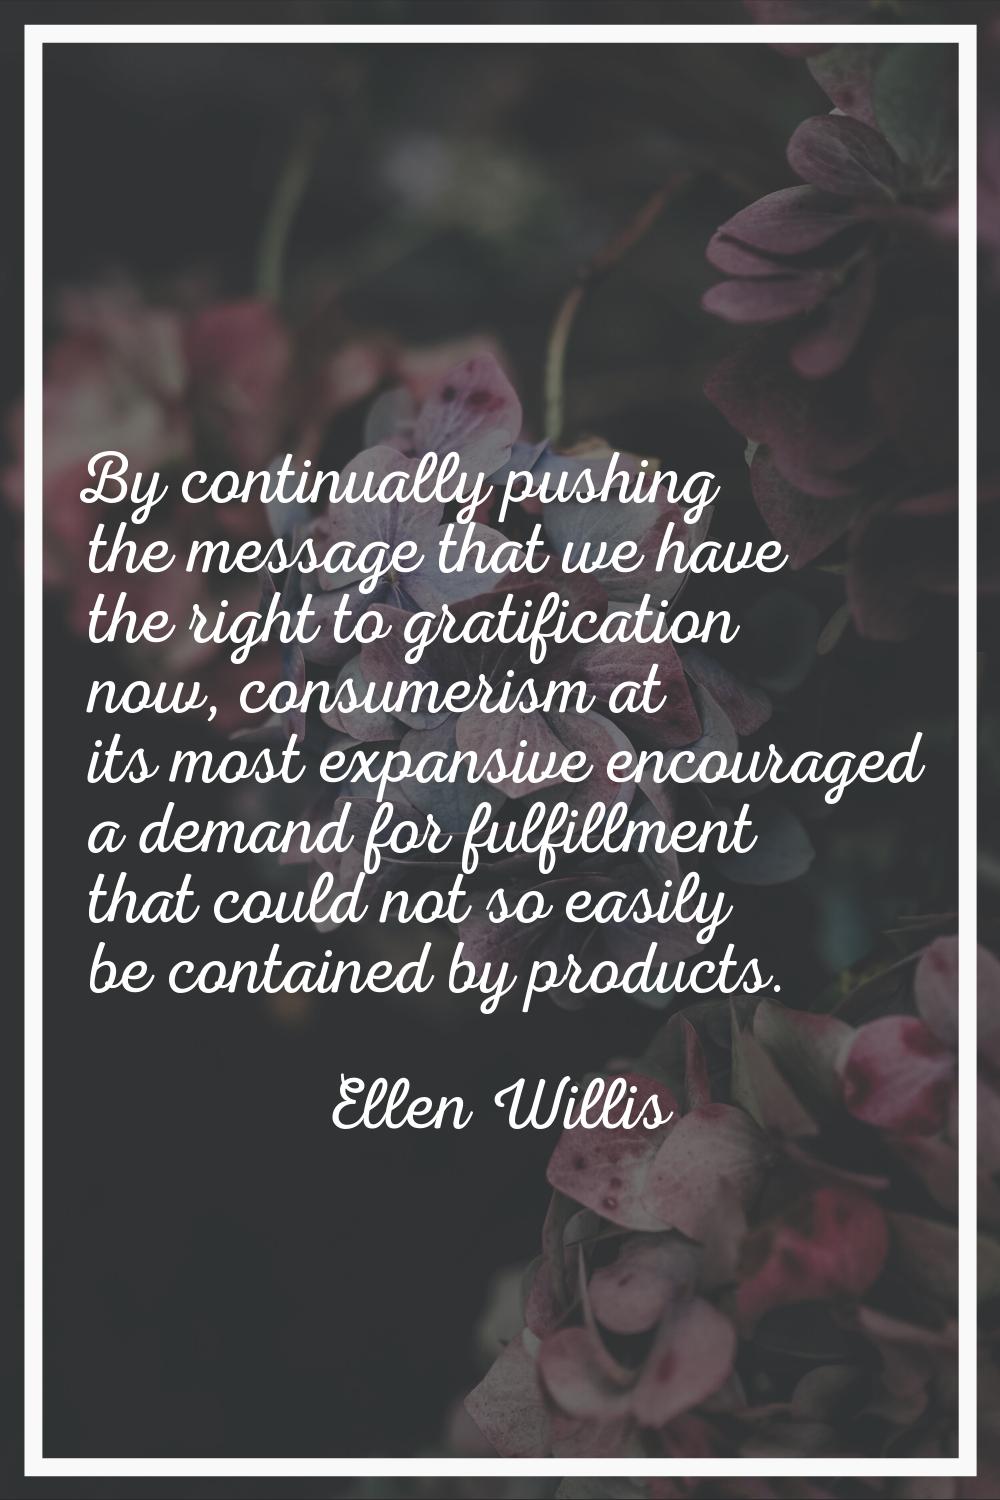 By continually pushing the message that we have the right to gratification now, consumerism at its 